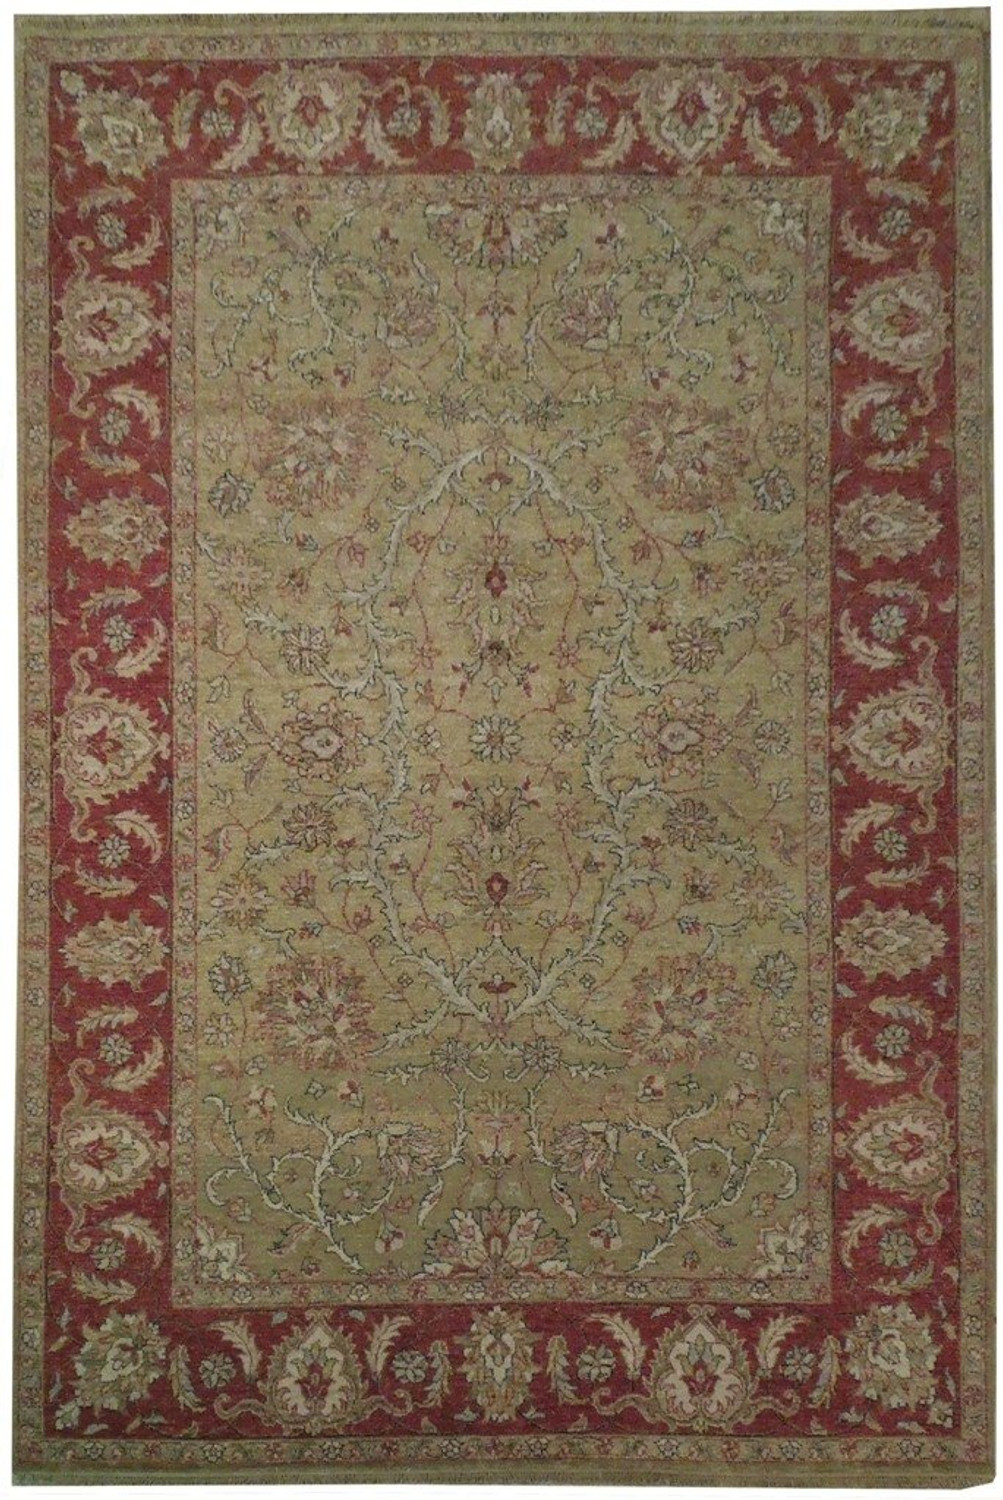 6x9 Authentic Vegetable Dyed Chobi Rug